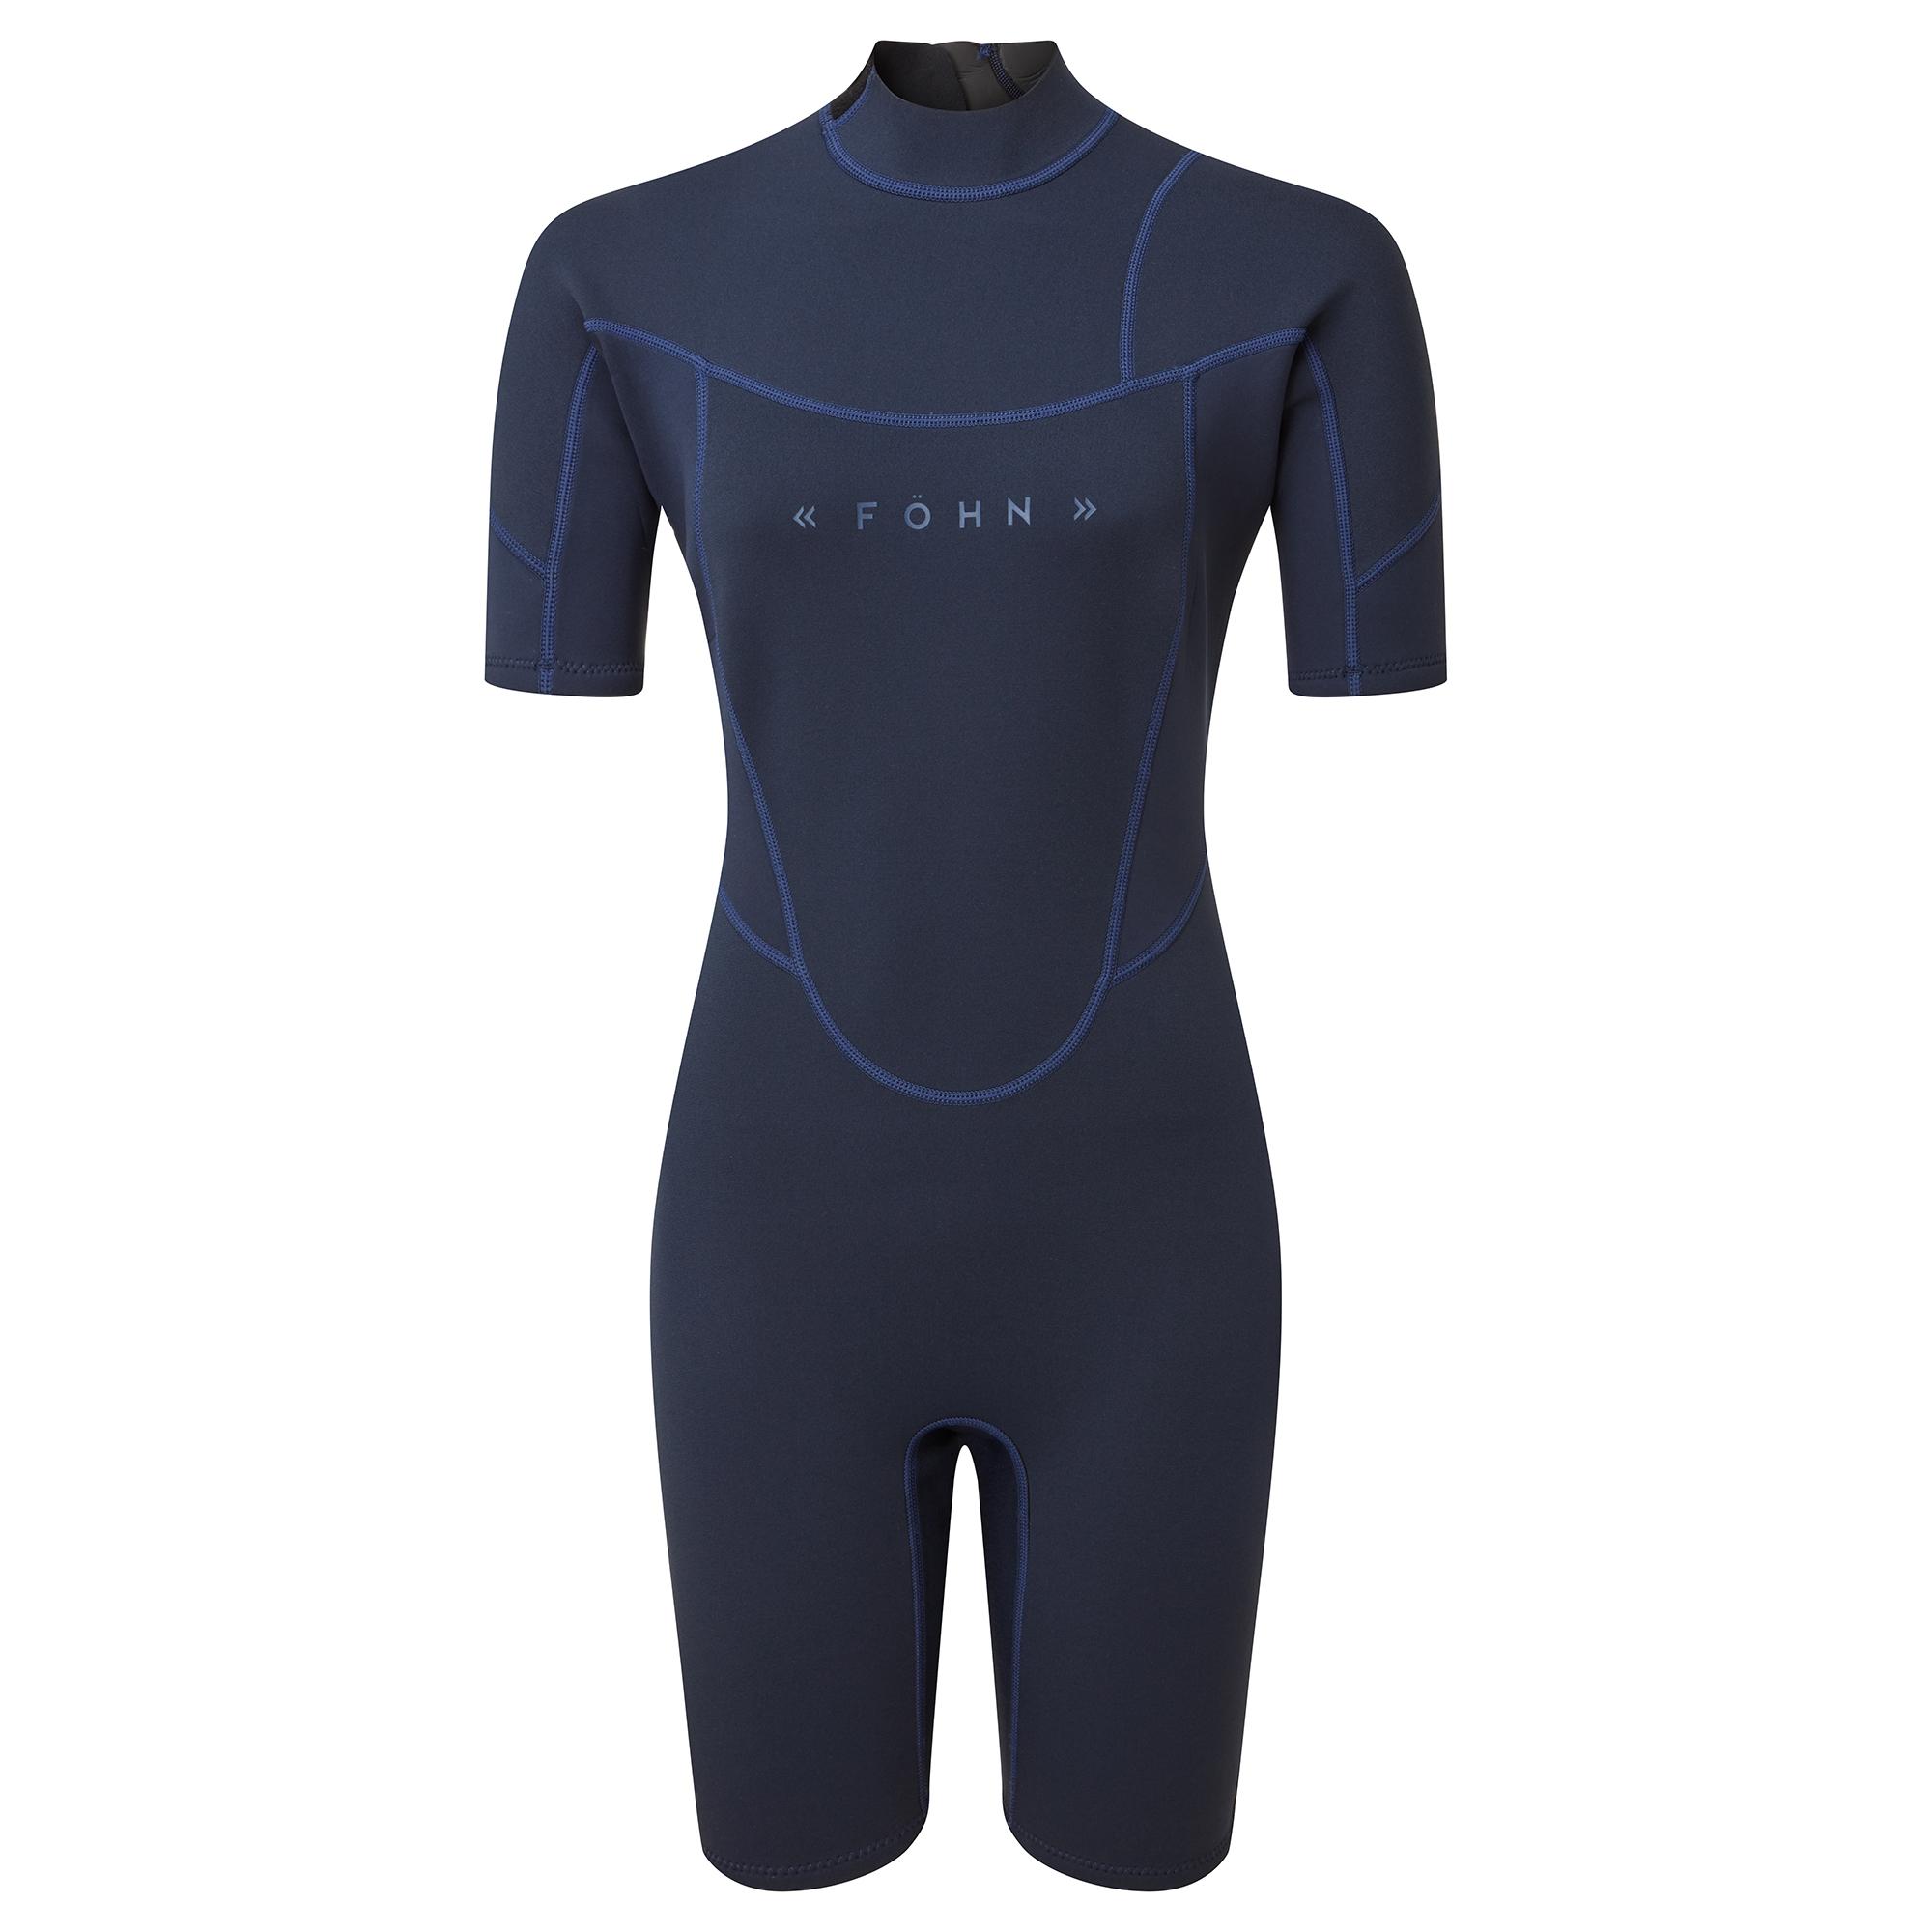 Fhn Womens 2mm Shorty Wetsuit - Navy